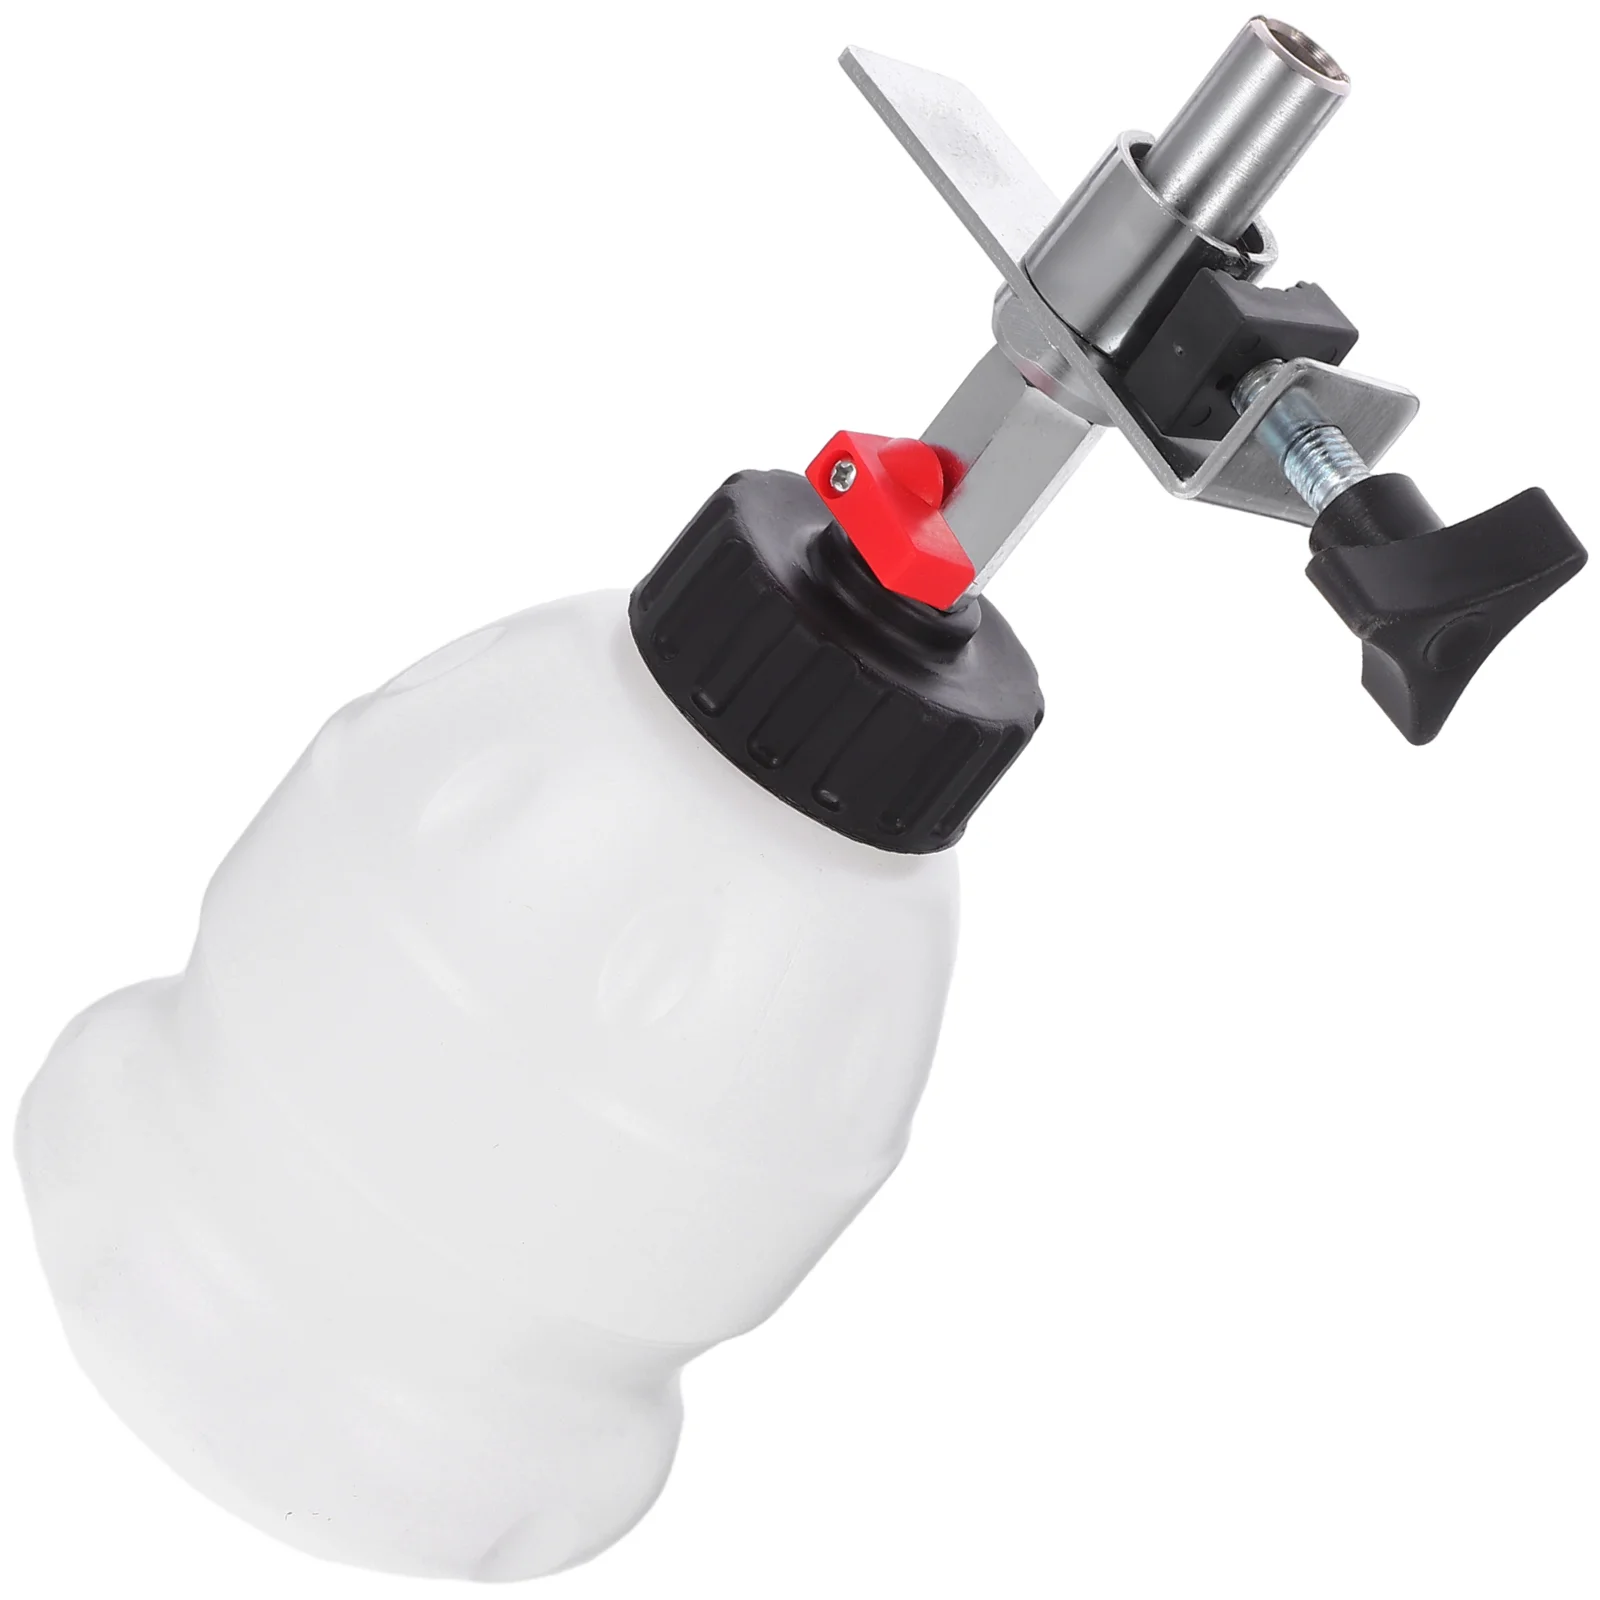 

Change The Oil Pot Brake Fluid Aspirator Refiller for Car Automatic Replacement Tool Plastic